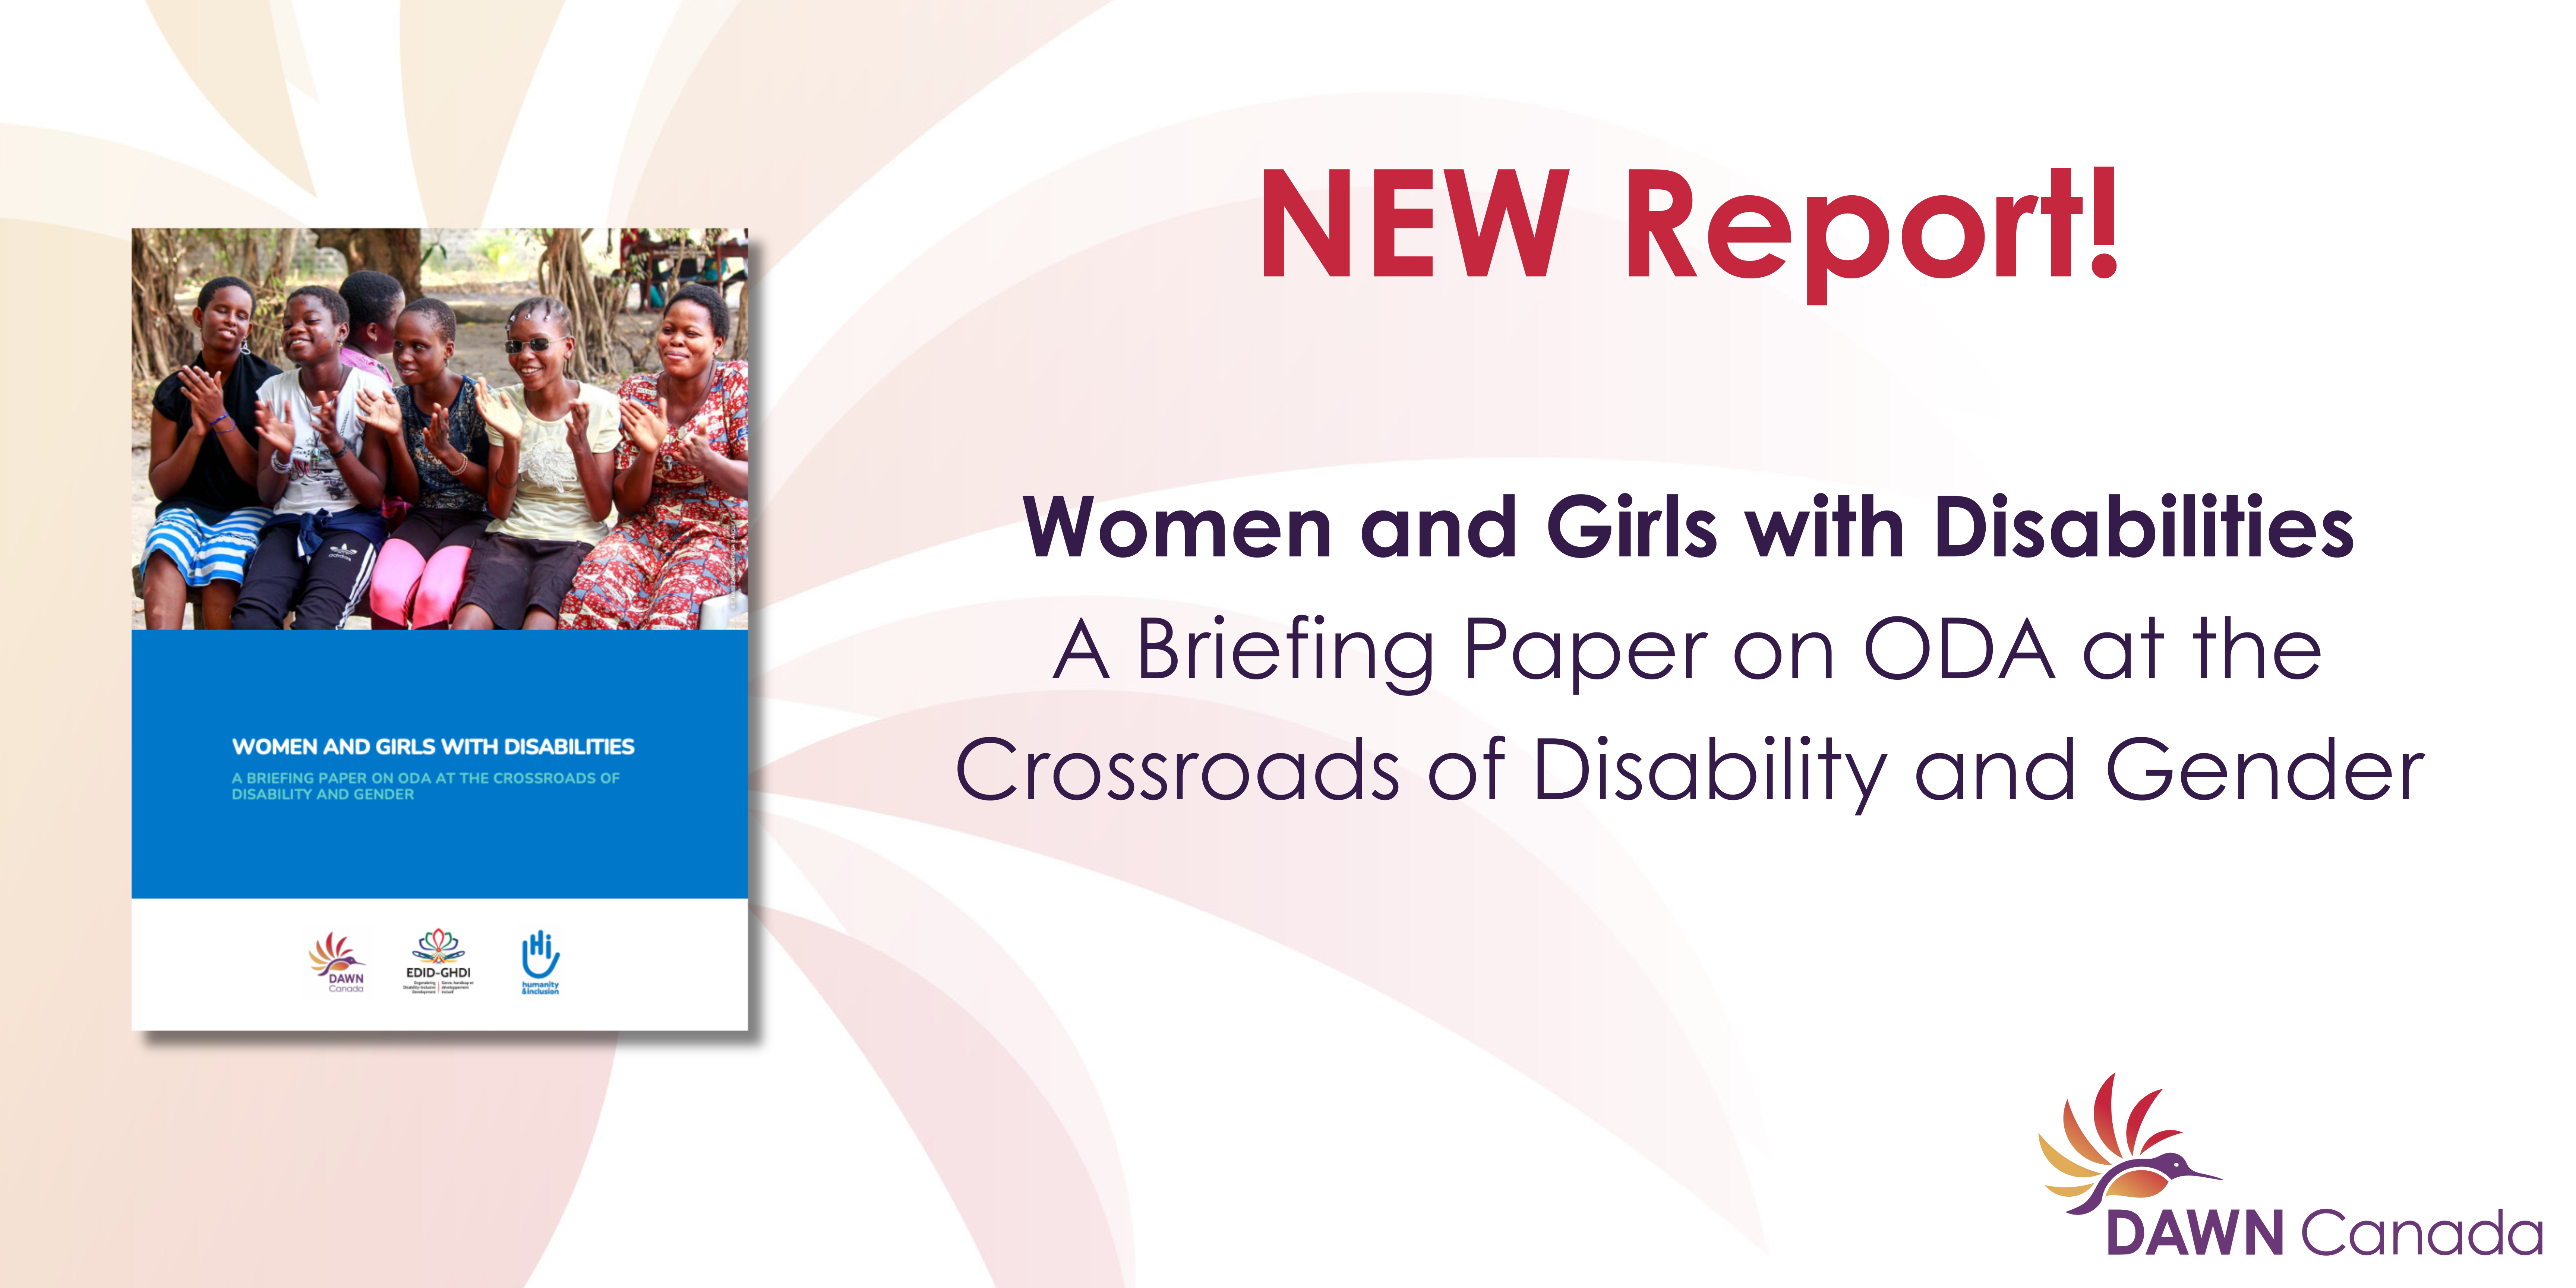 Women & Girls with Disabilities: A Briefing Paper on ODA at the Crossroads of Disability & Gender